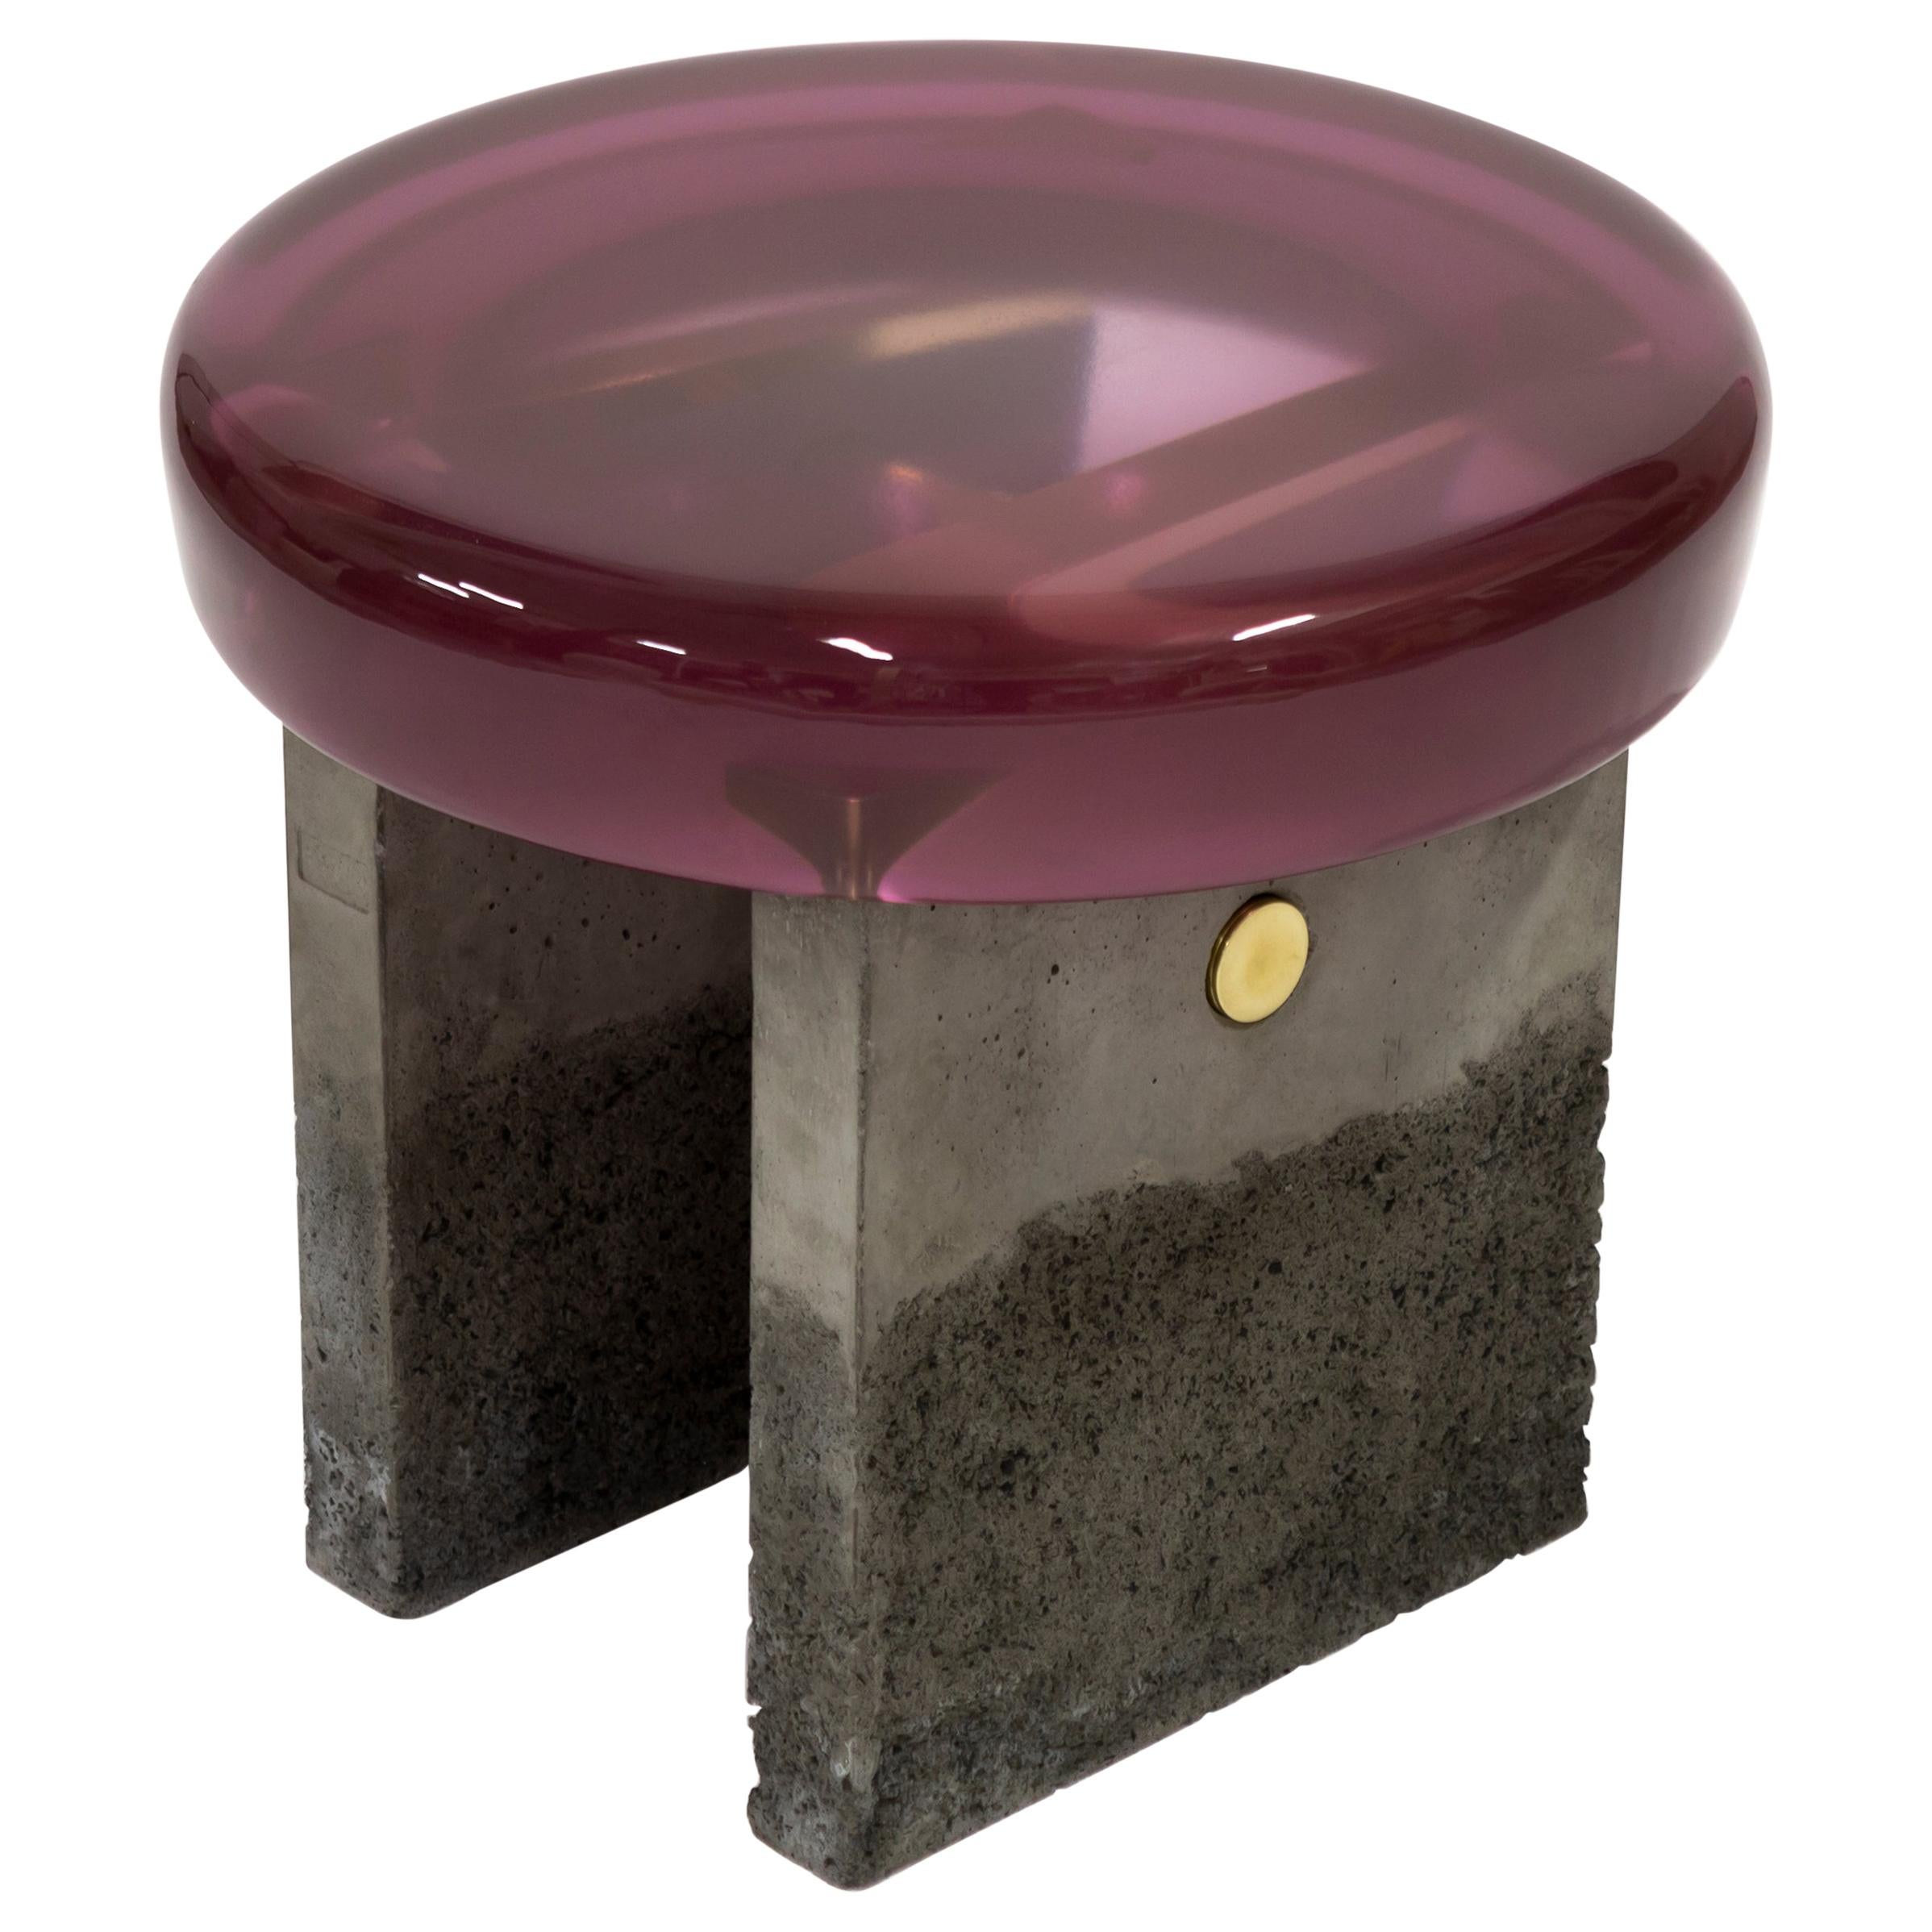 Golia Stool by Draga&Aurel Resin and Brass, 21st Century For Sale